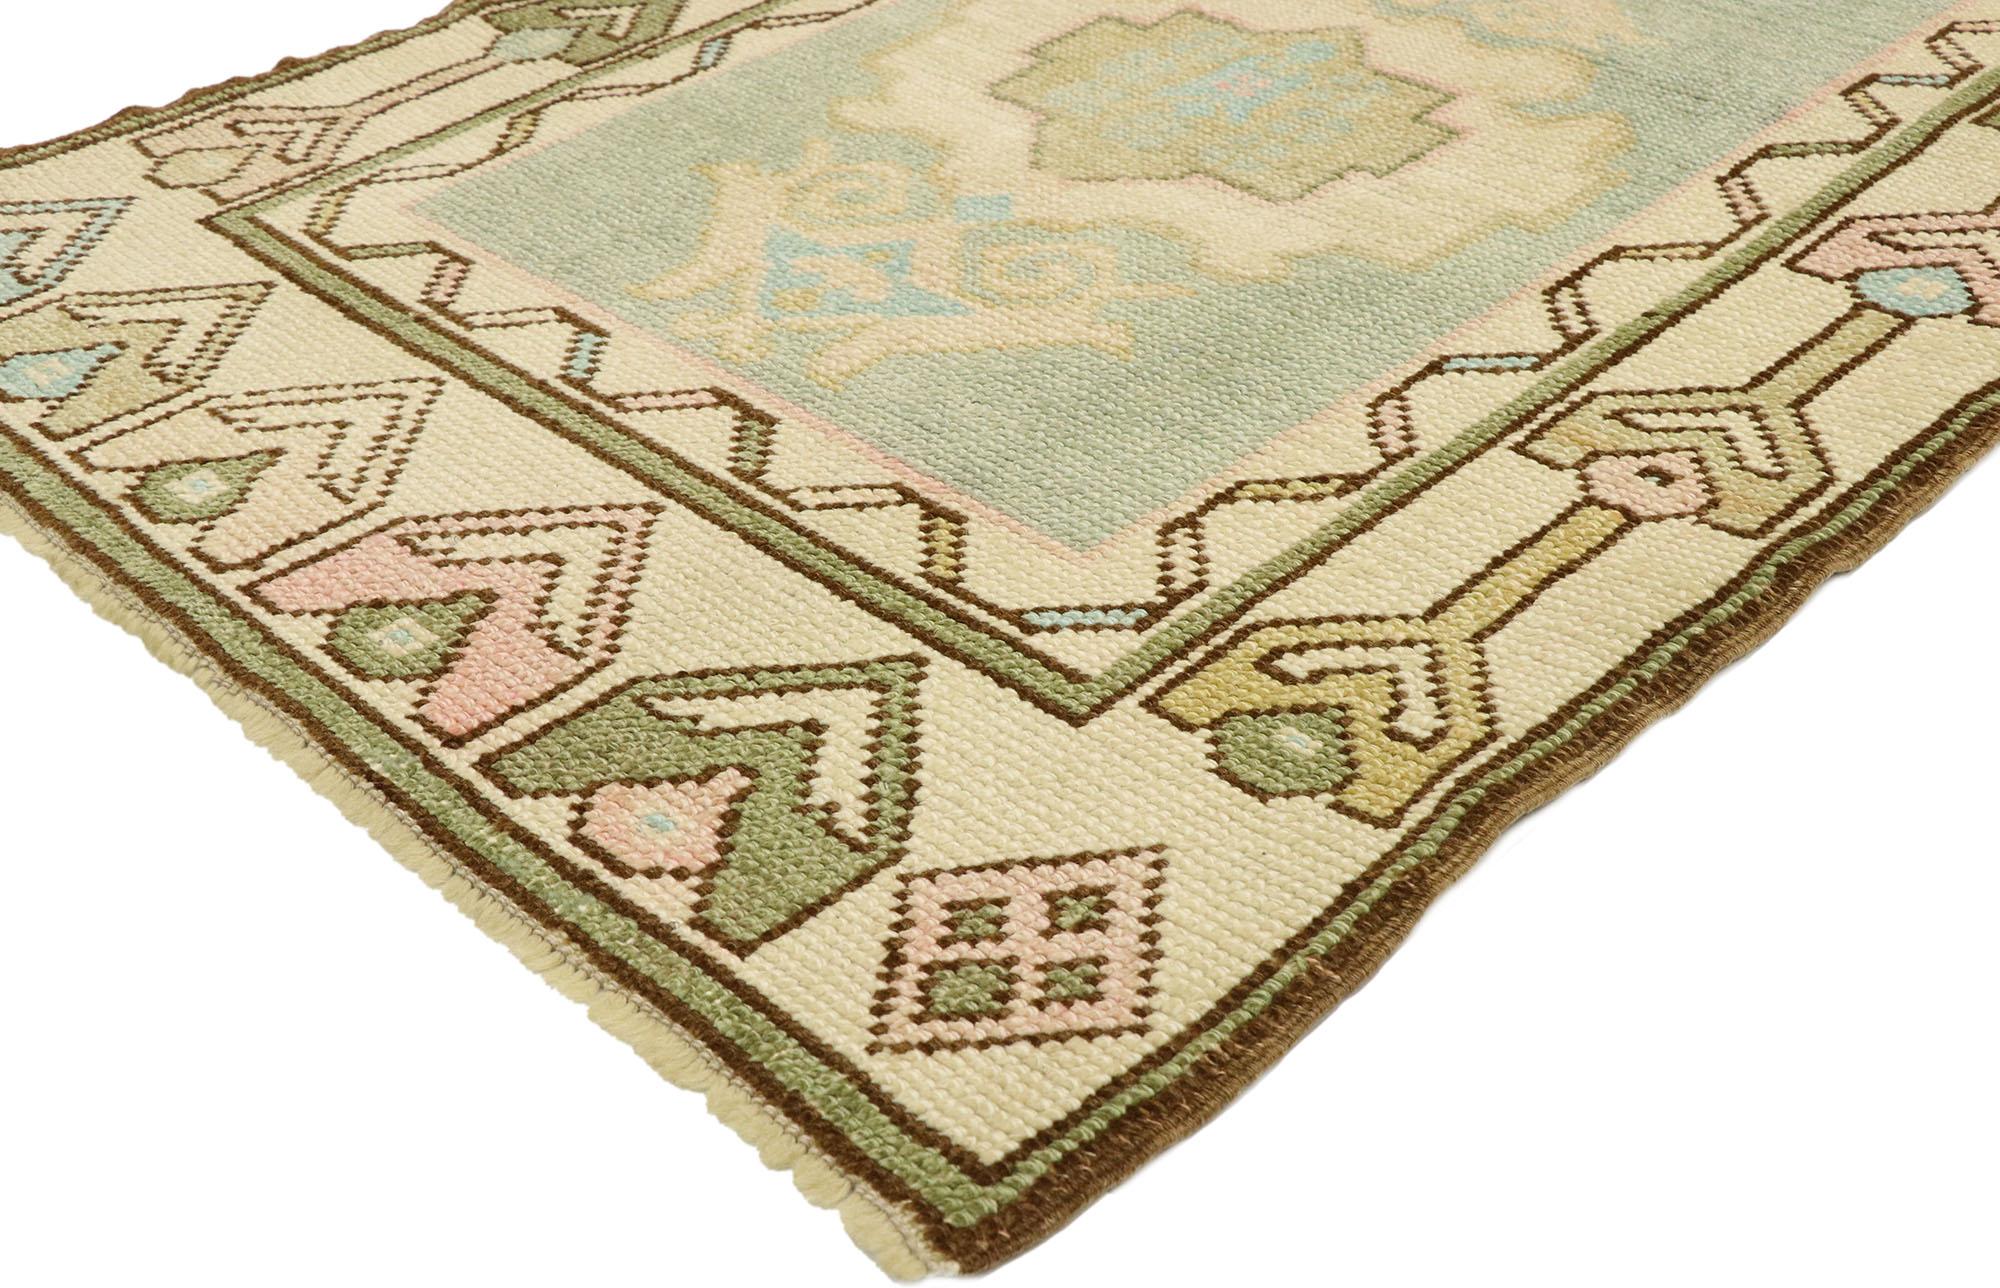 52934, vintage Turkish Oushak rug with romantic Swedish Gustavian farmhouse style 03'00 x 05'09. Soft, bespoke vibes meet a romantic Swedish Gustavian farmhouse style in this hand knotted wool vintage Turkish Oushak rug. The pale bluish-sage colored